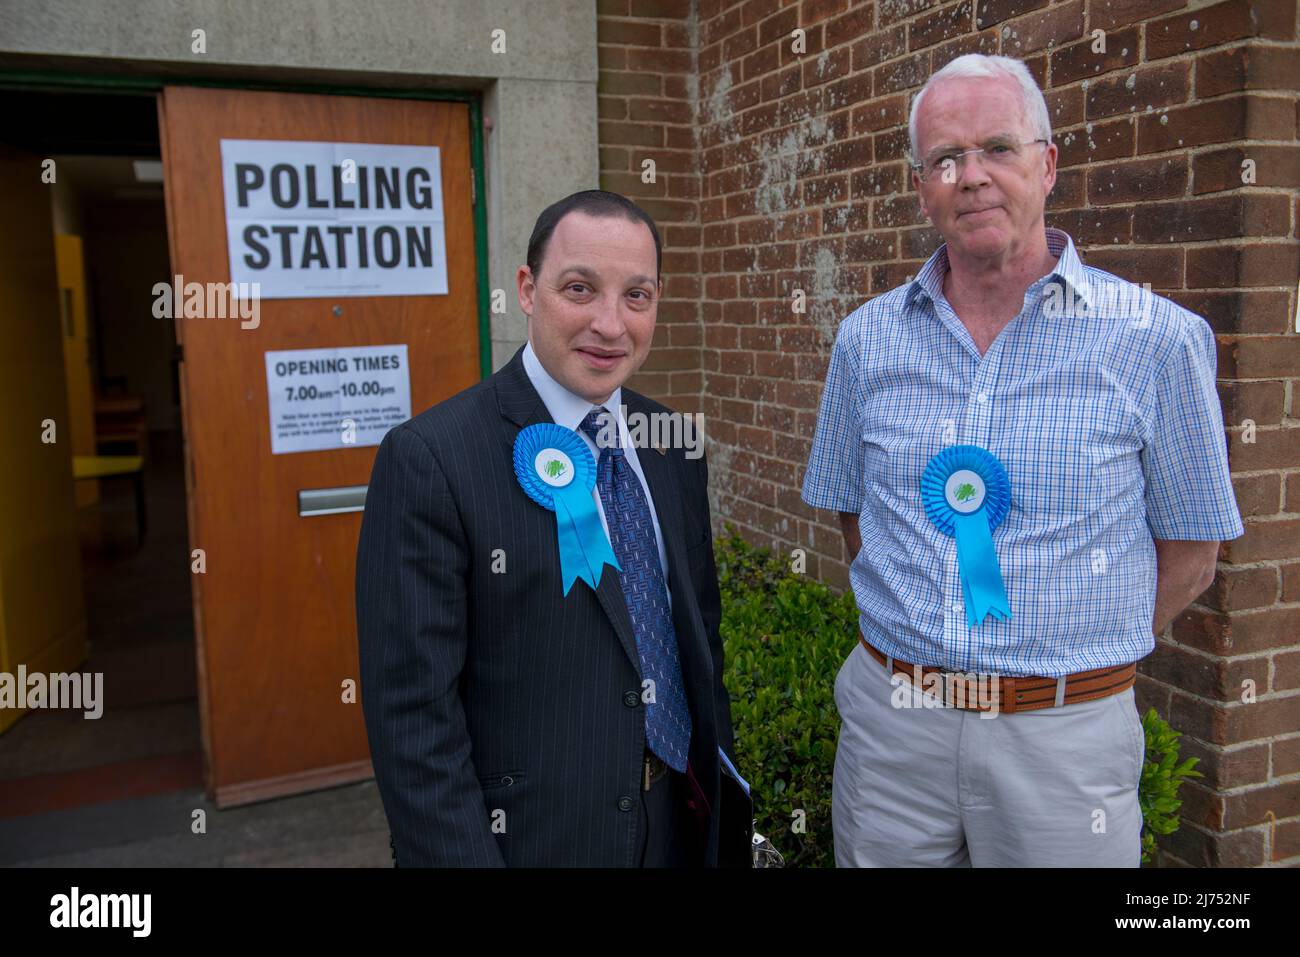 Alwoodly, Leeds, West Yorkshire Conservative Party Council Candidate Dan COHEN (left) and Councillor Neil BUCKLEY (right). Moor Allerton Church Hall, Leeds. The Conservative Party Candidate won 4,466 votes. 5 May 2022. Stock Photo